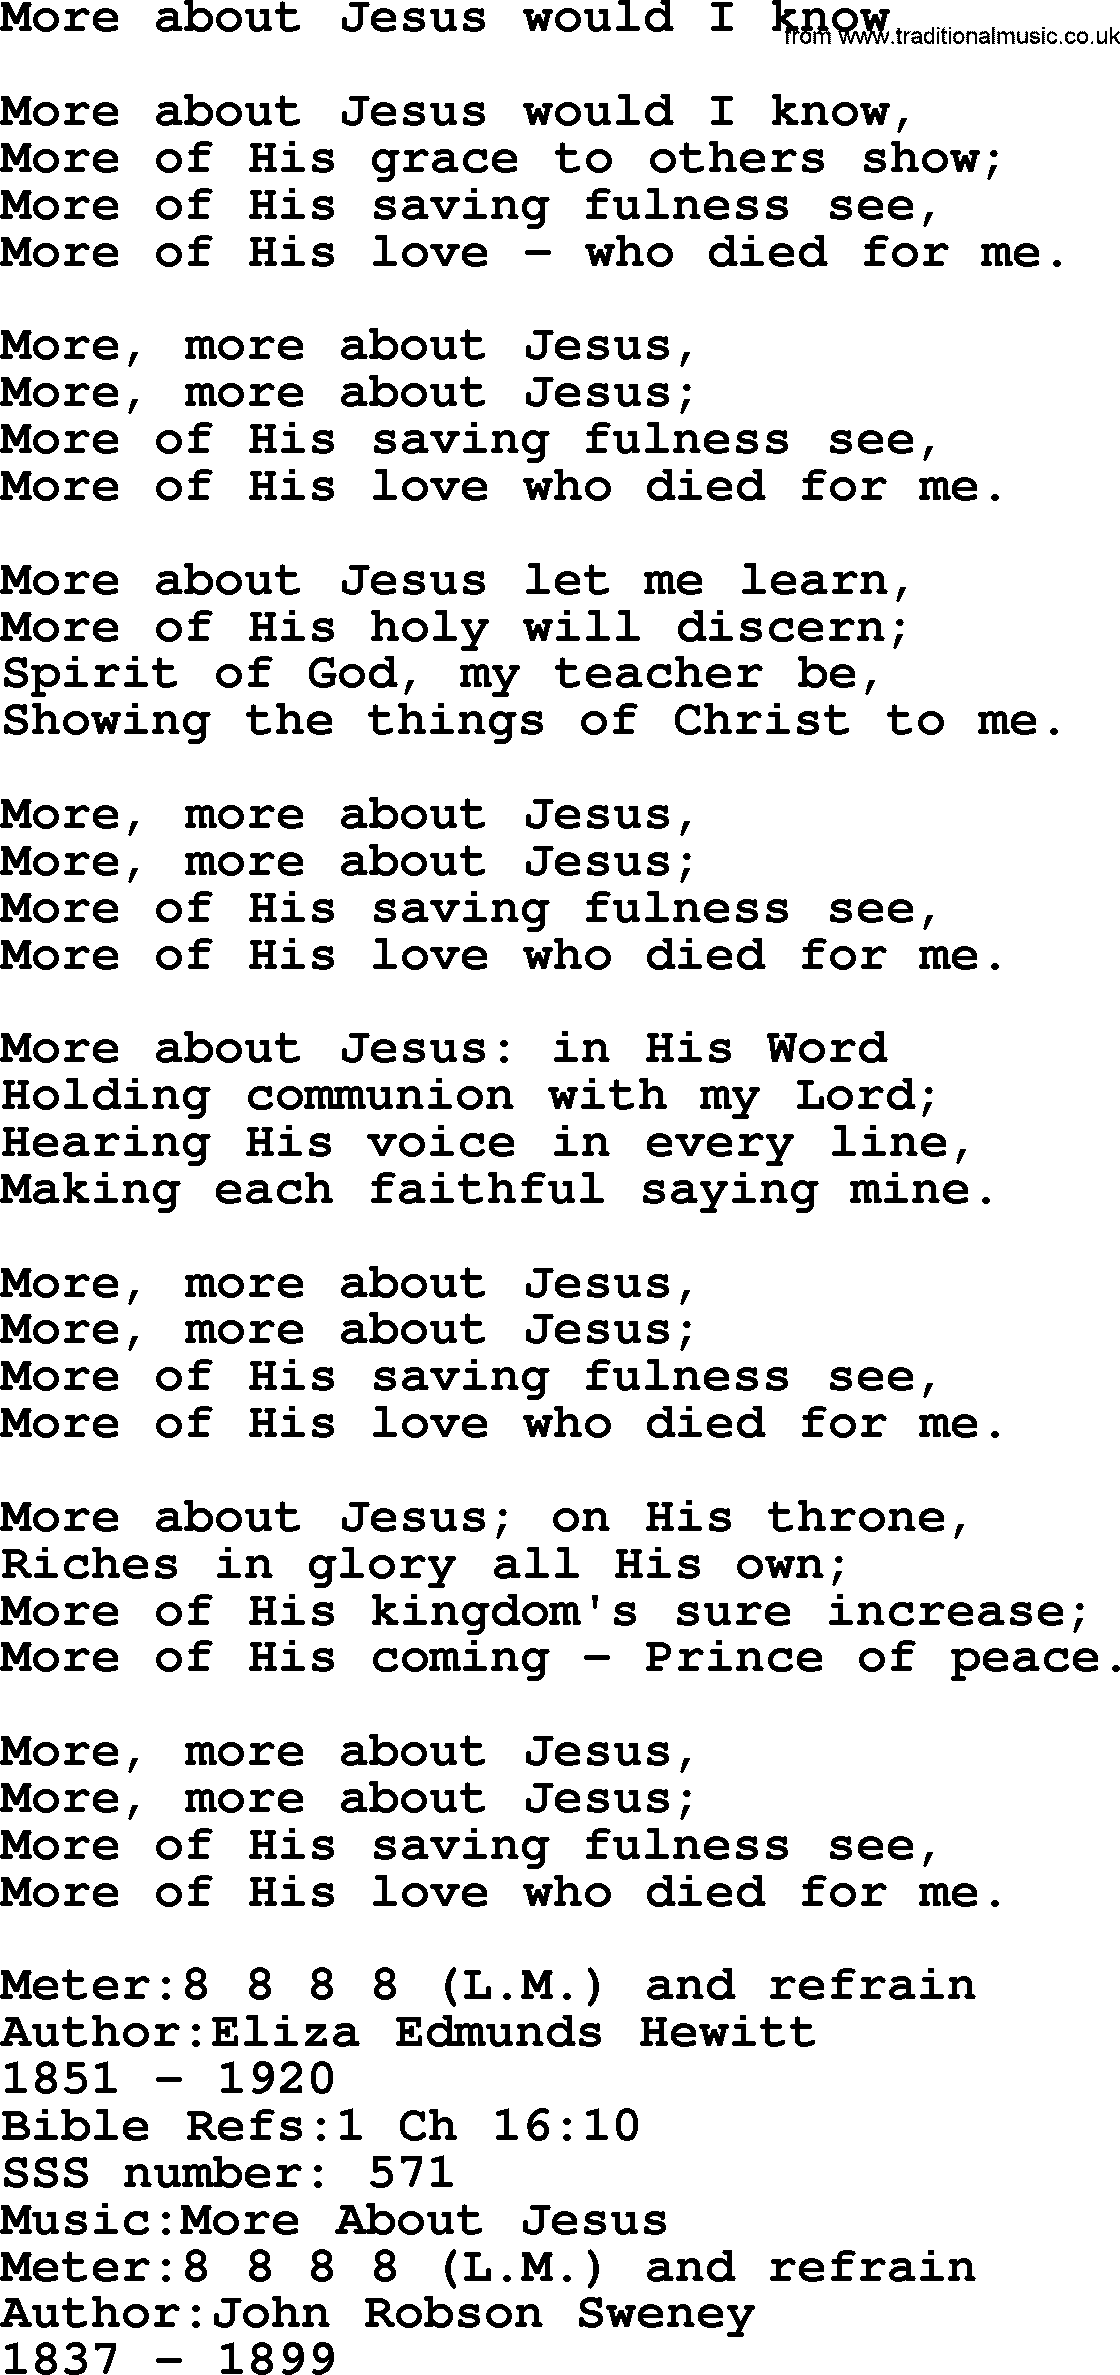 Sacred Songs and Solos complete, 1200 Hymns, title: More About Jesus Would I Know, lyrics and PDF